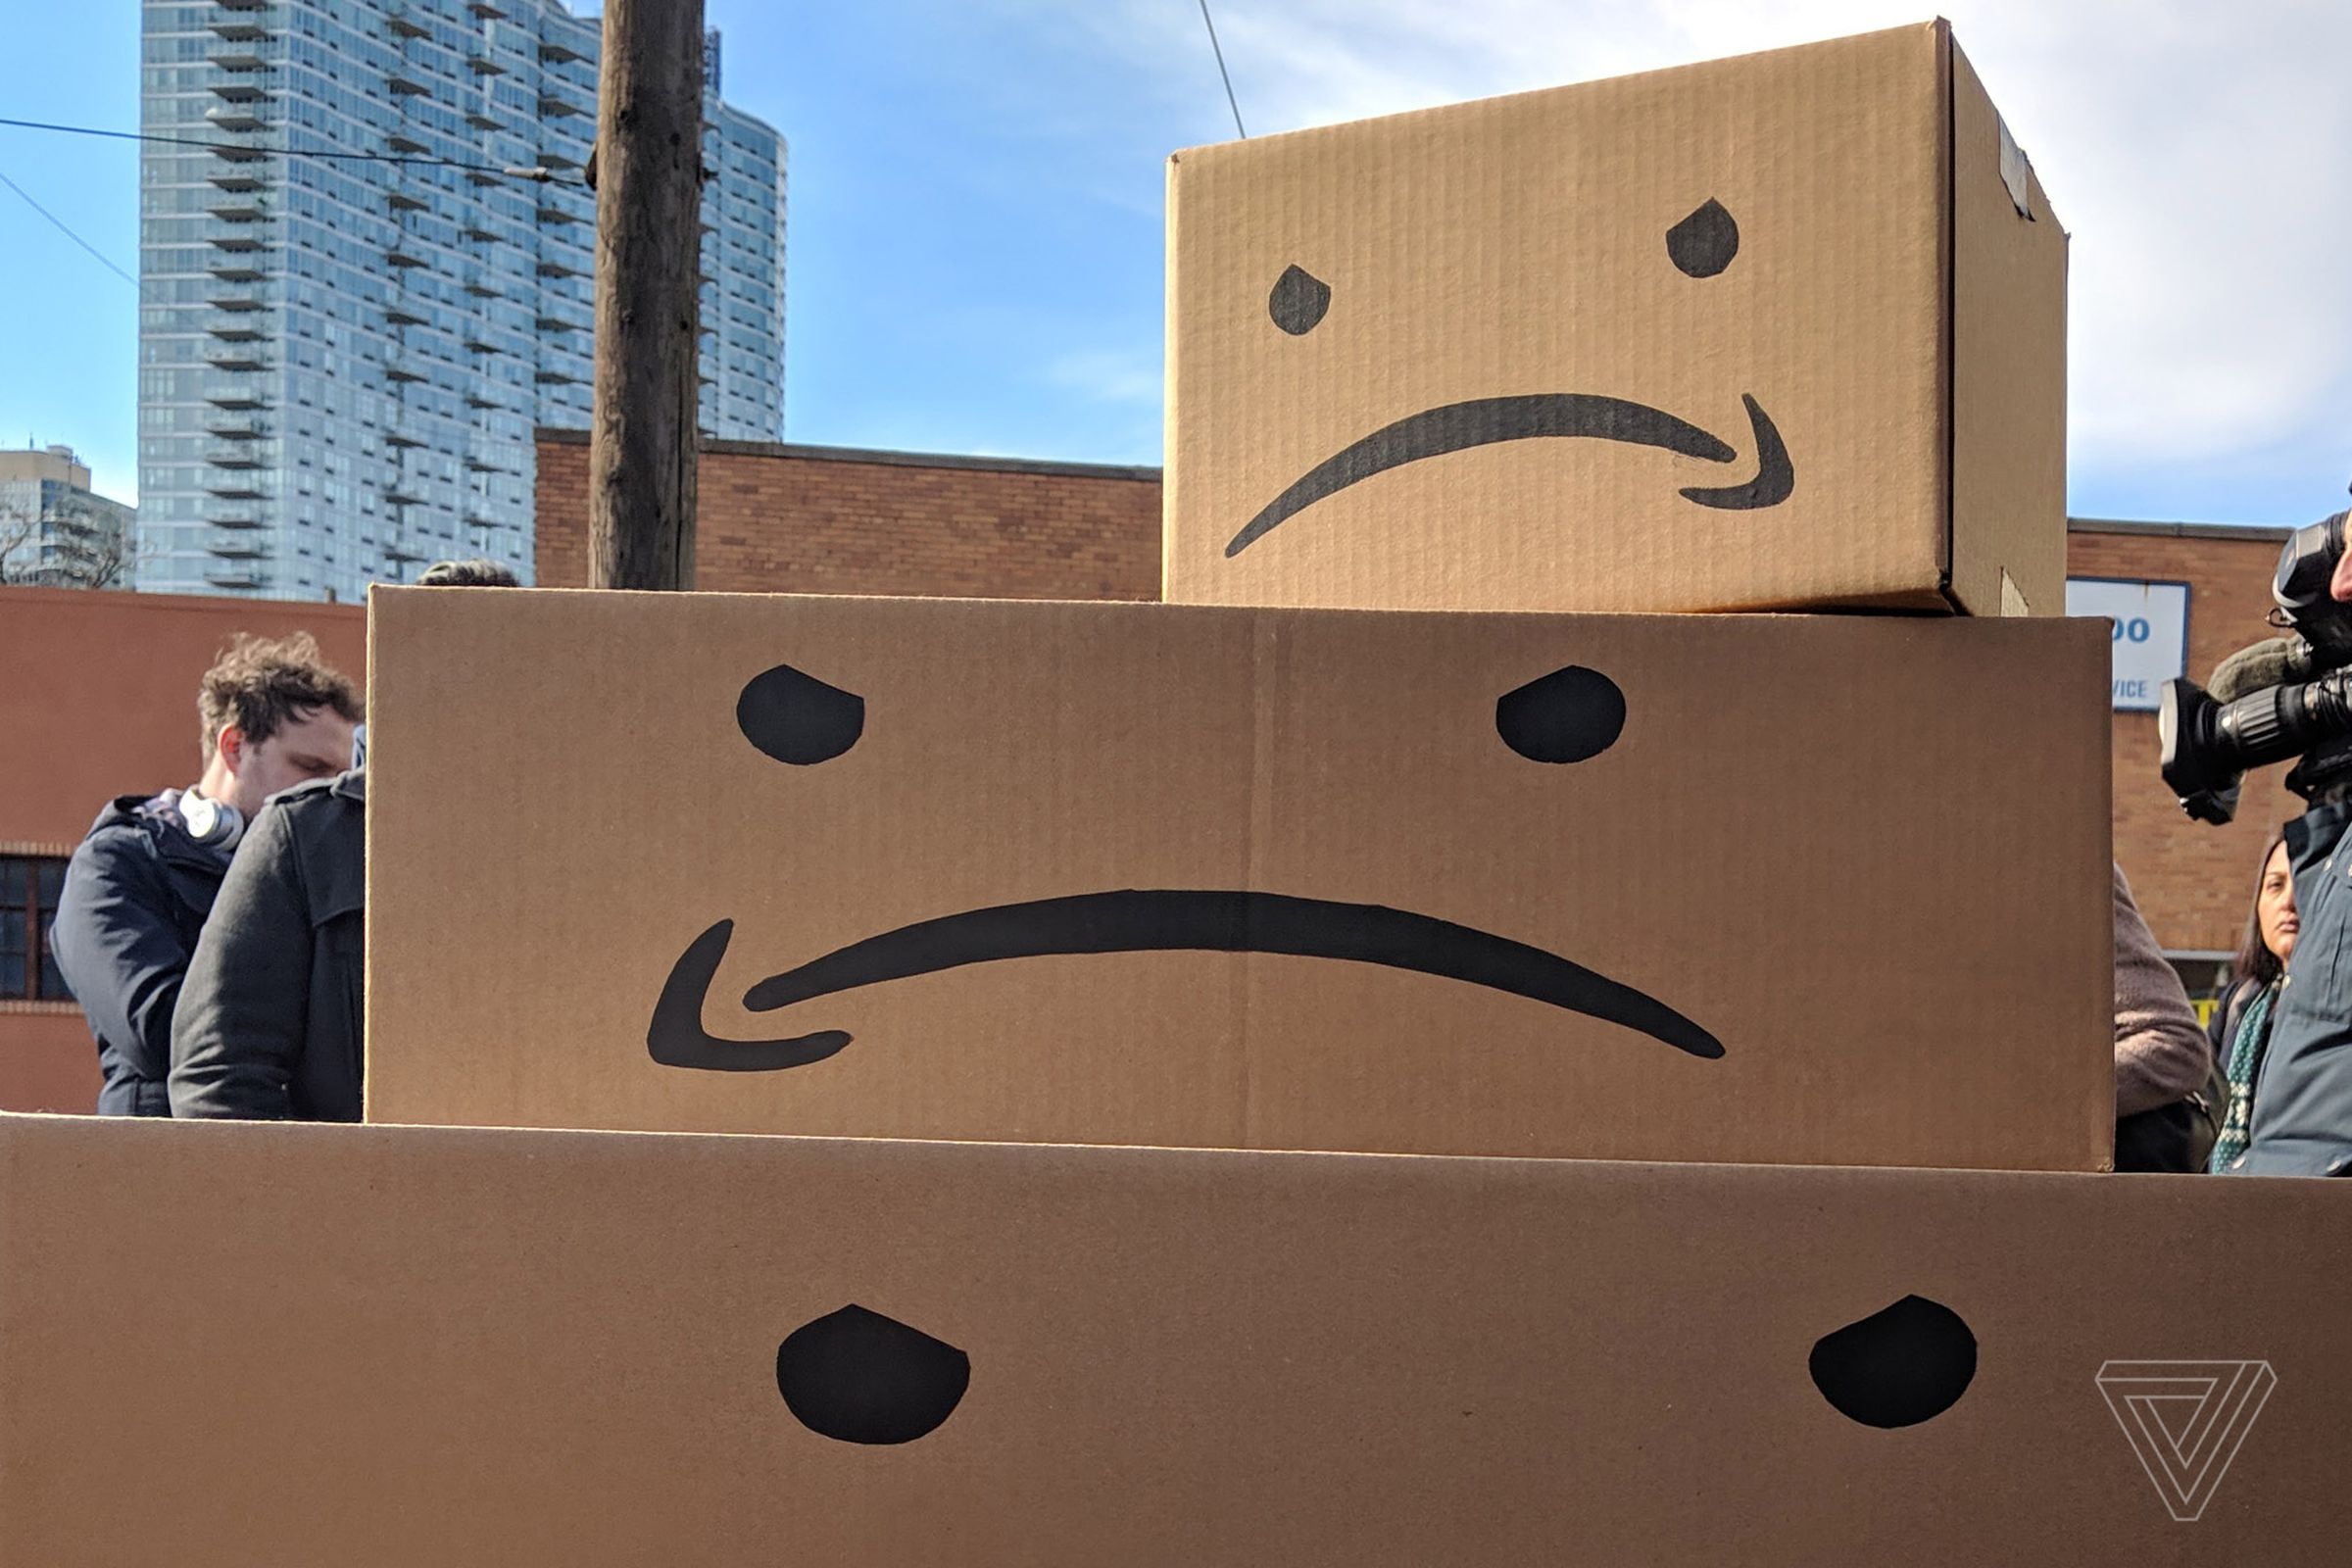 Image of three cardboard boxes stacked on top of each other, with frowning faces using an upside-down amazon logo for the mouth printed on them.